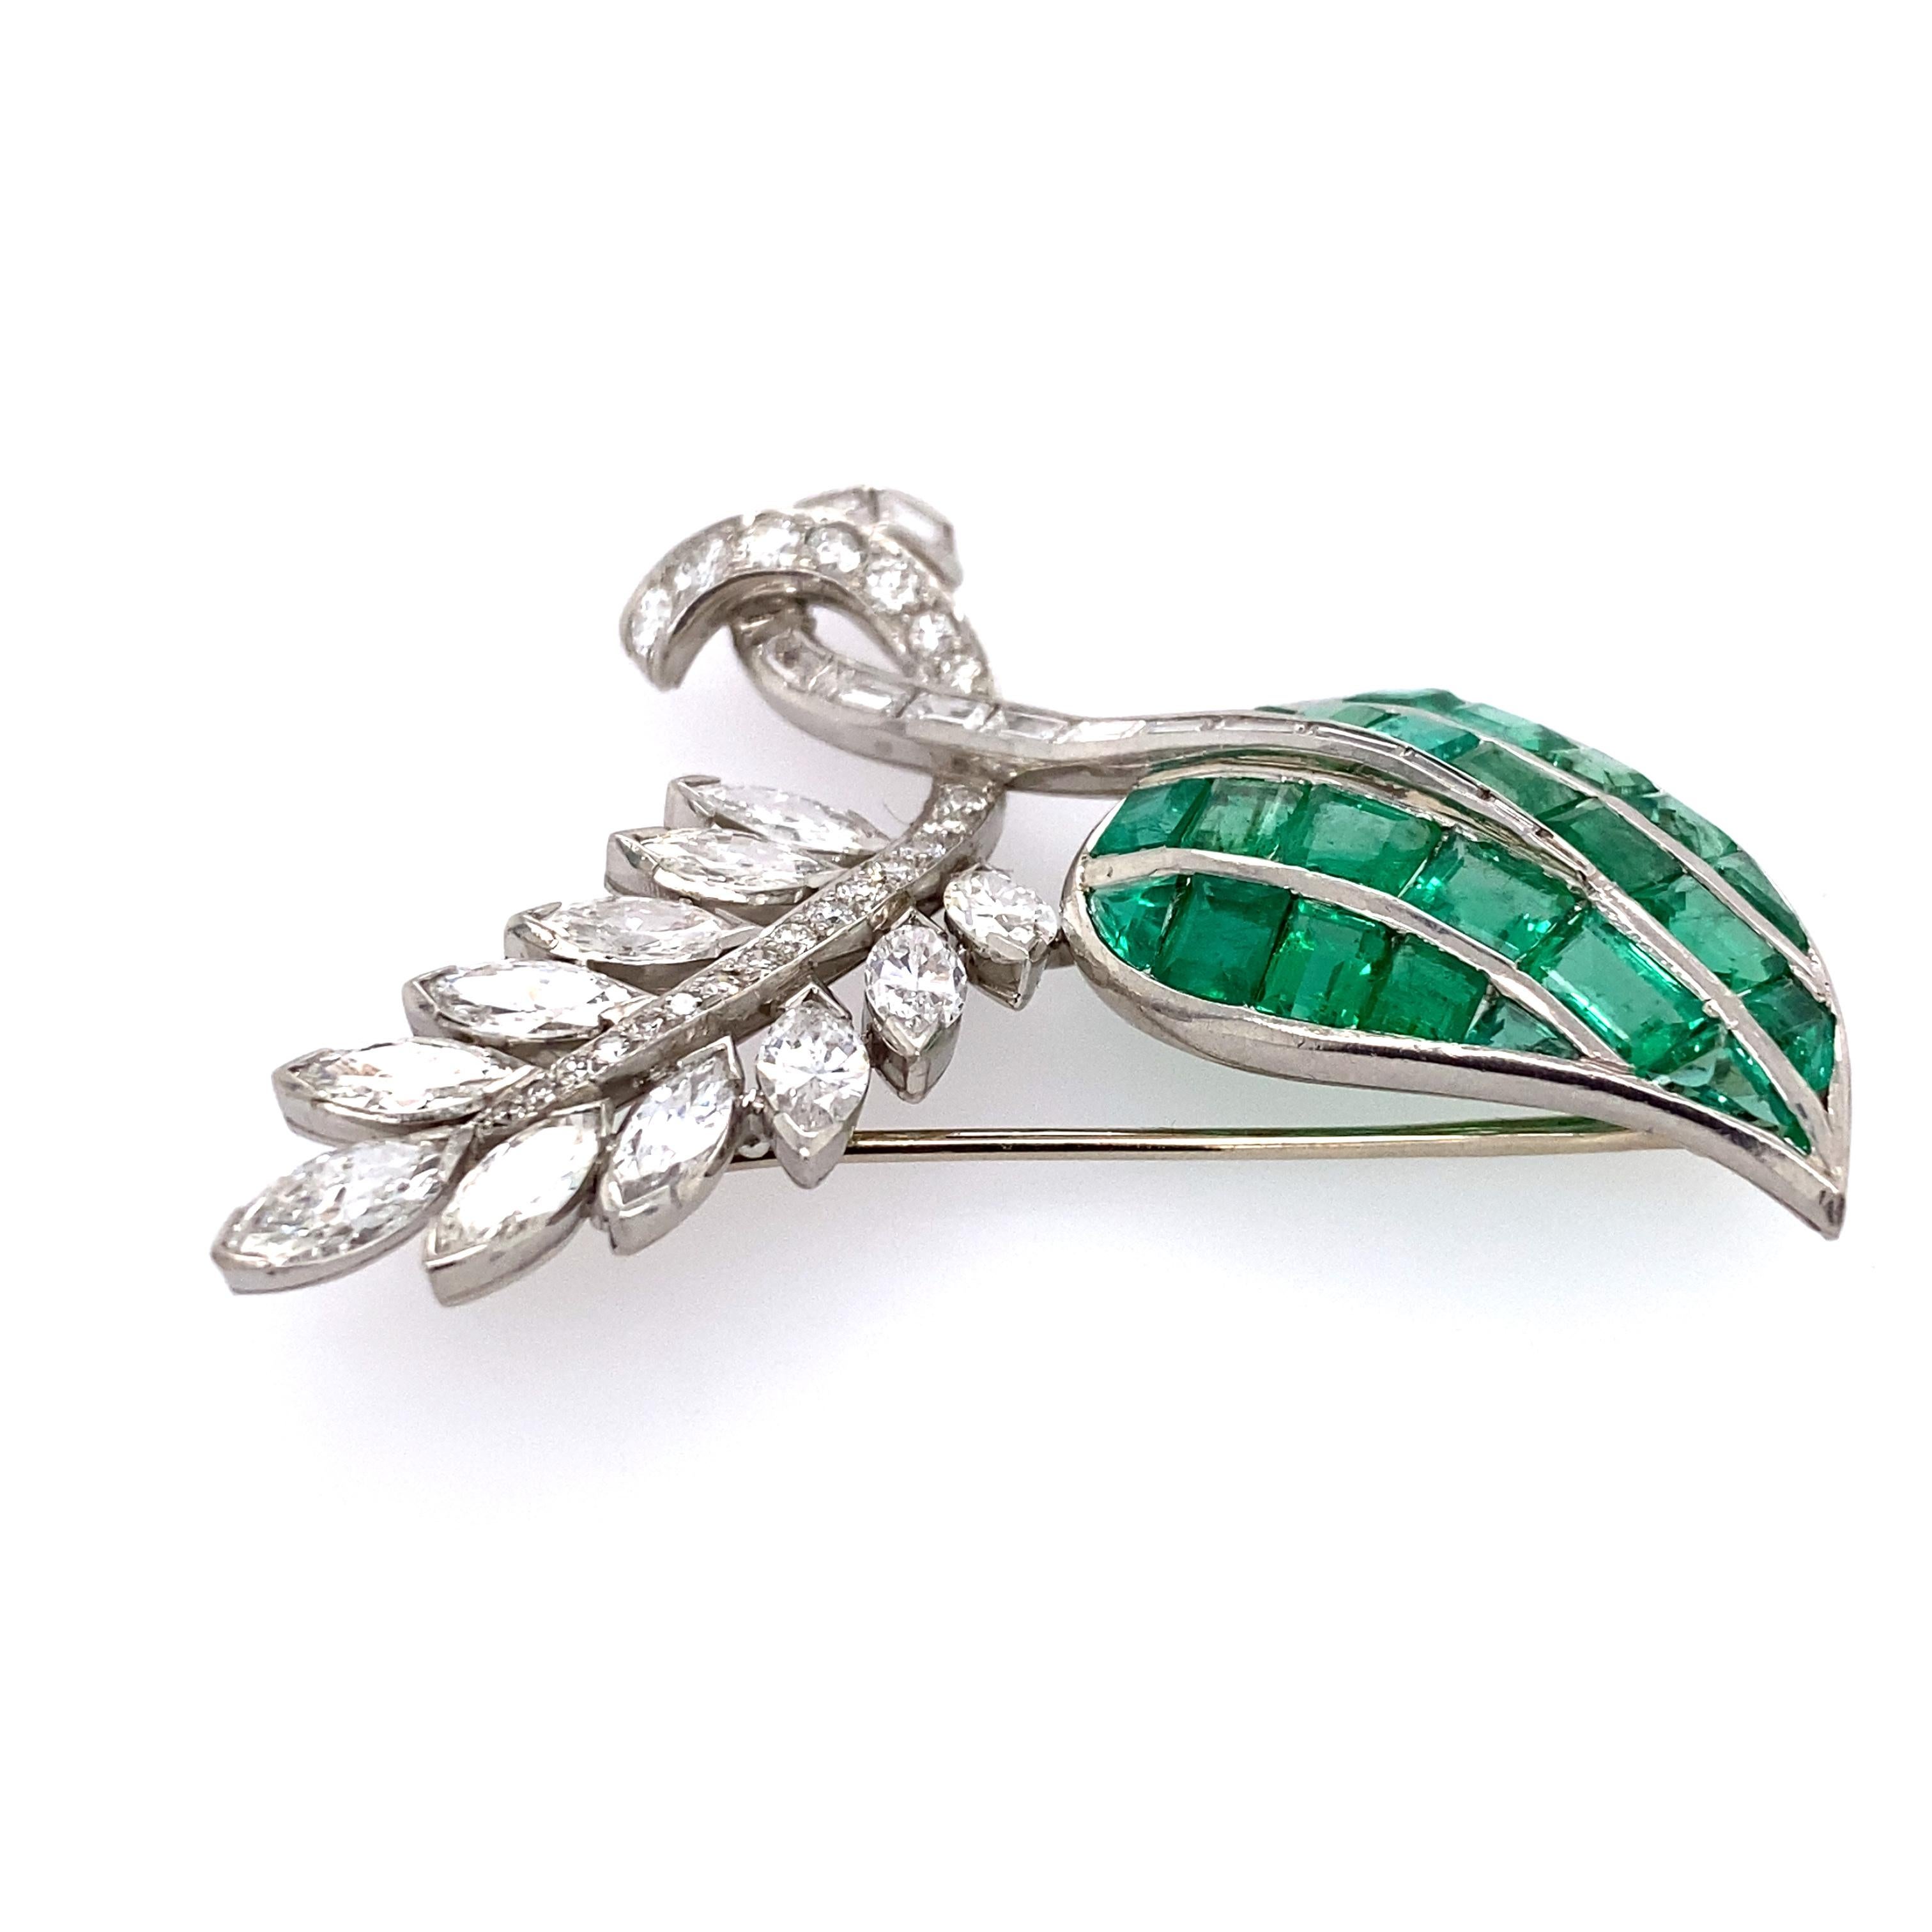 Platinum and Emerald Diamond Brooch In Excellent Condition For Sale In New York, NY